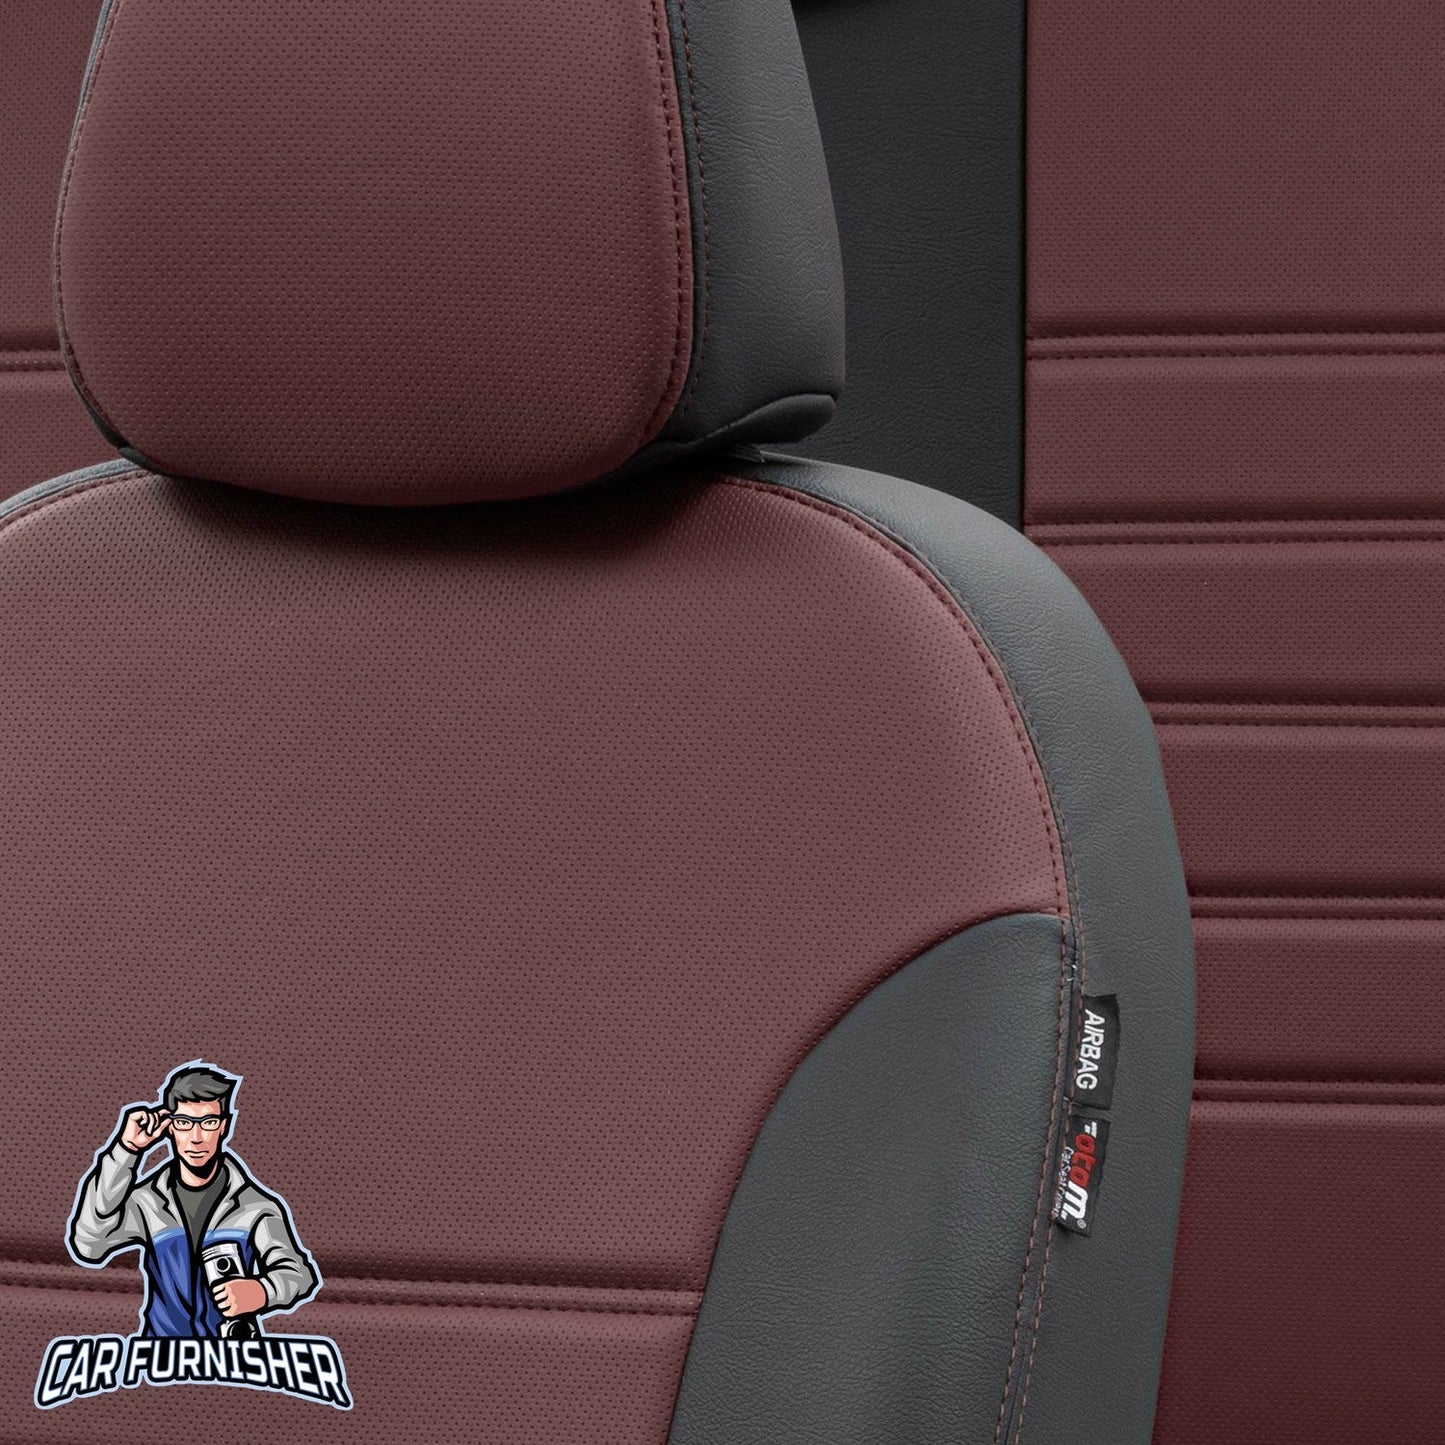 Volkswagen Crafter Seat Cover Istanbul Leather Design Burgundy Leather